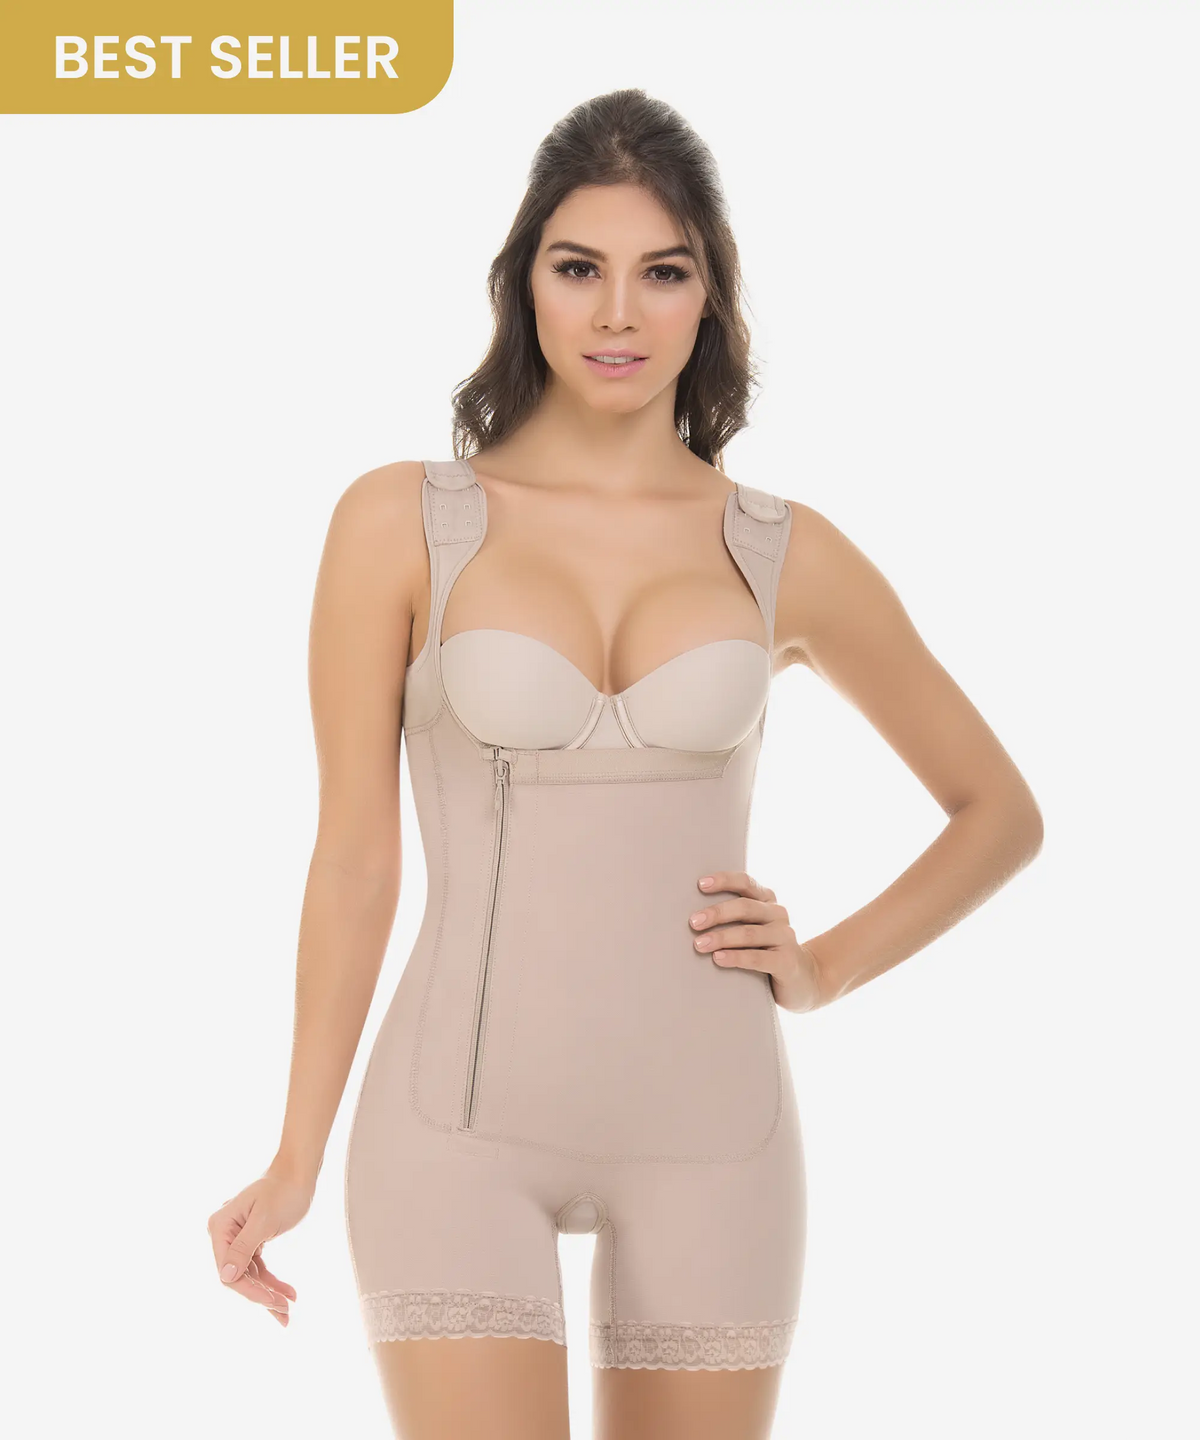 Where to get the most flattering shapewear in Singapore